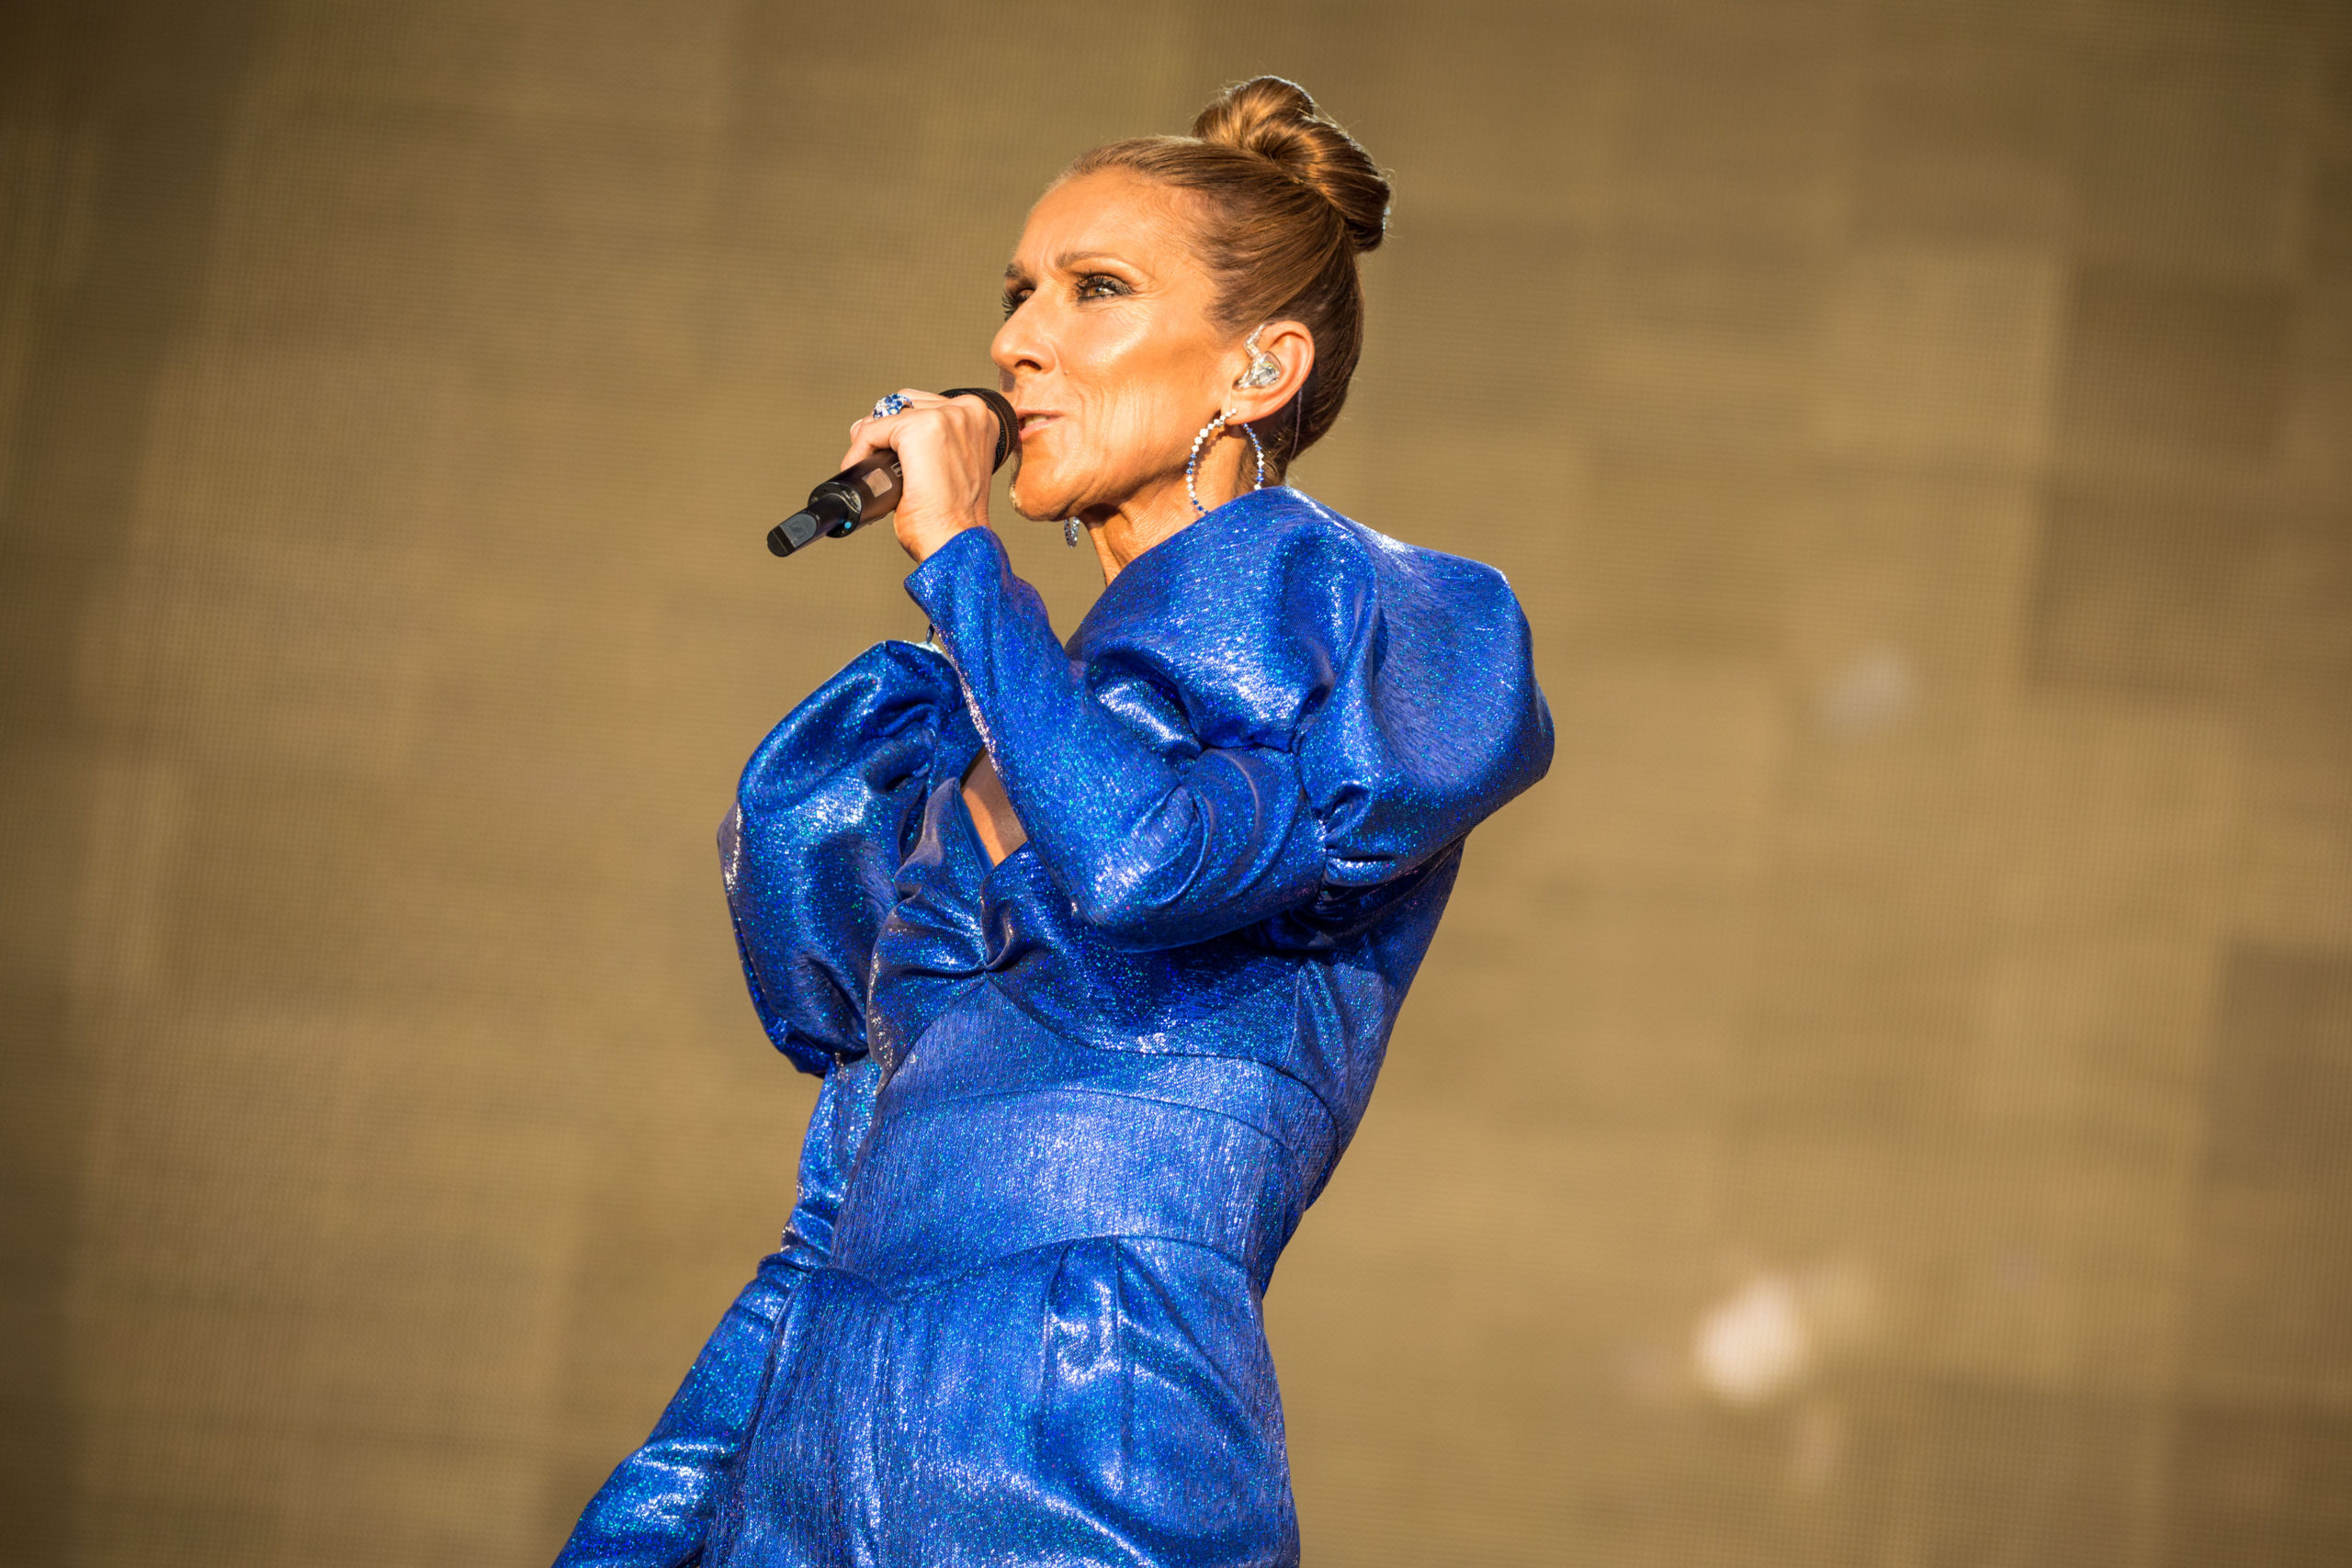 Celine Dion Shares Rare Statement About Her Battle With Stiff Person Syndrome: 'One of the hardest experiences of my life' | Celine Dion fans are rejoicing after they were able to get a glimpse of the singer seemingly doing well and in good spirits despite her tragic health battle.